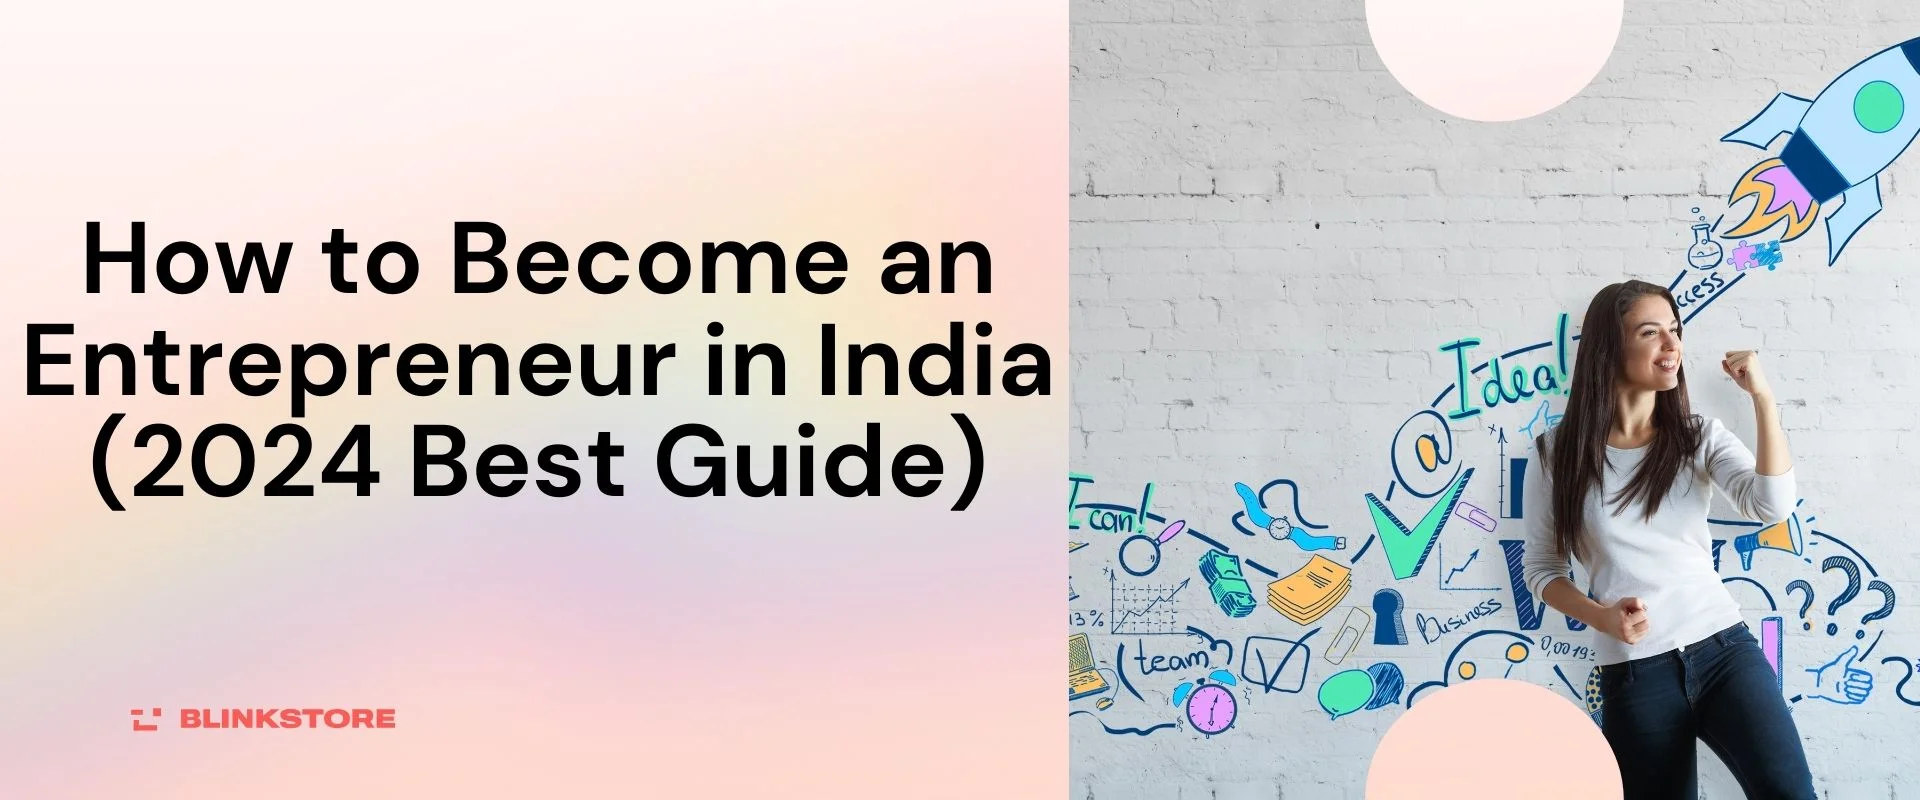 How to Become an Entrepreneur in India (2024 Best Guide)